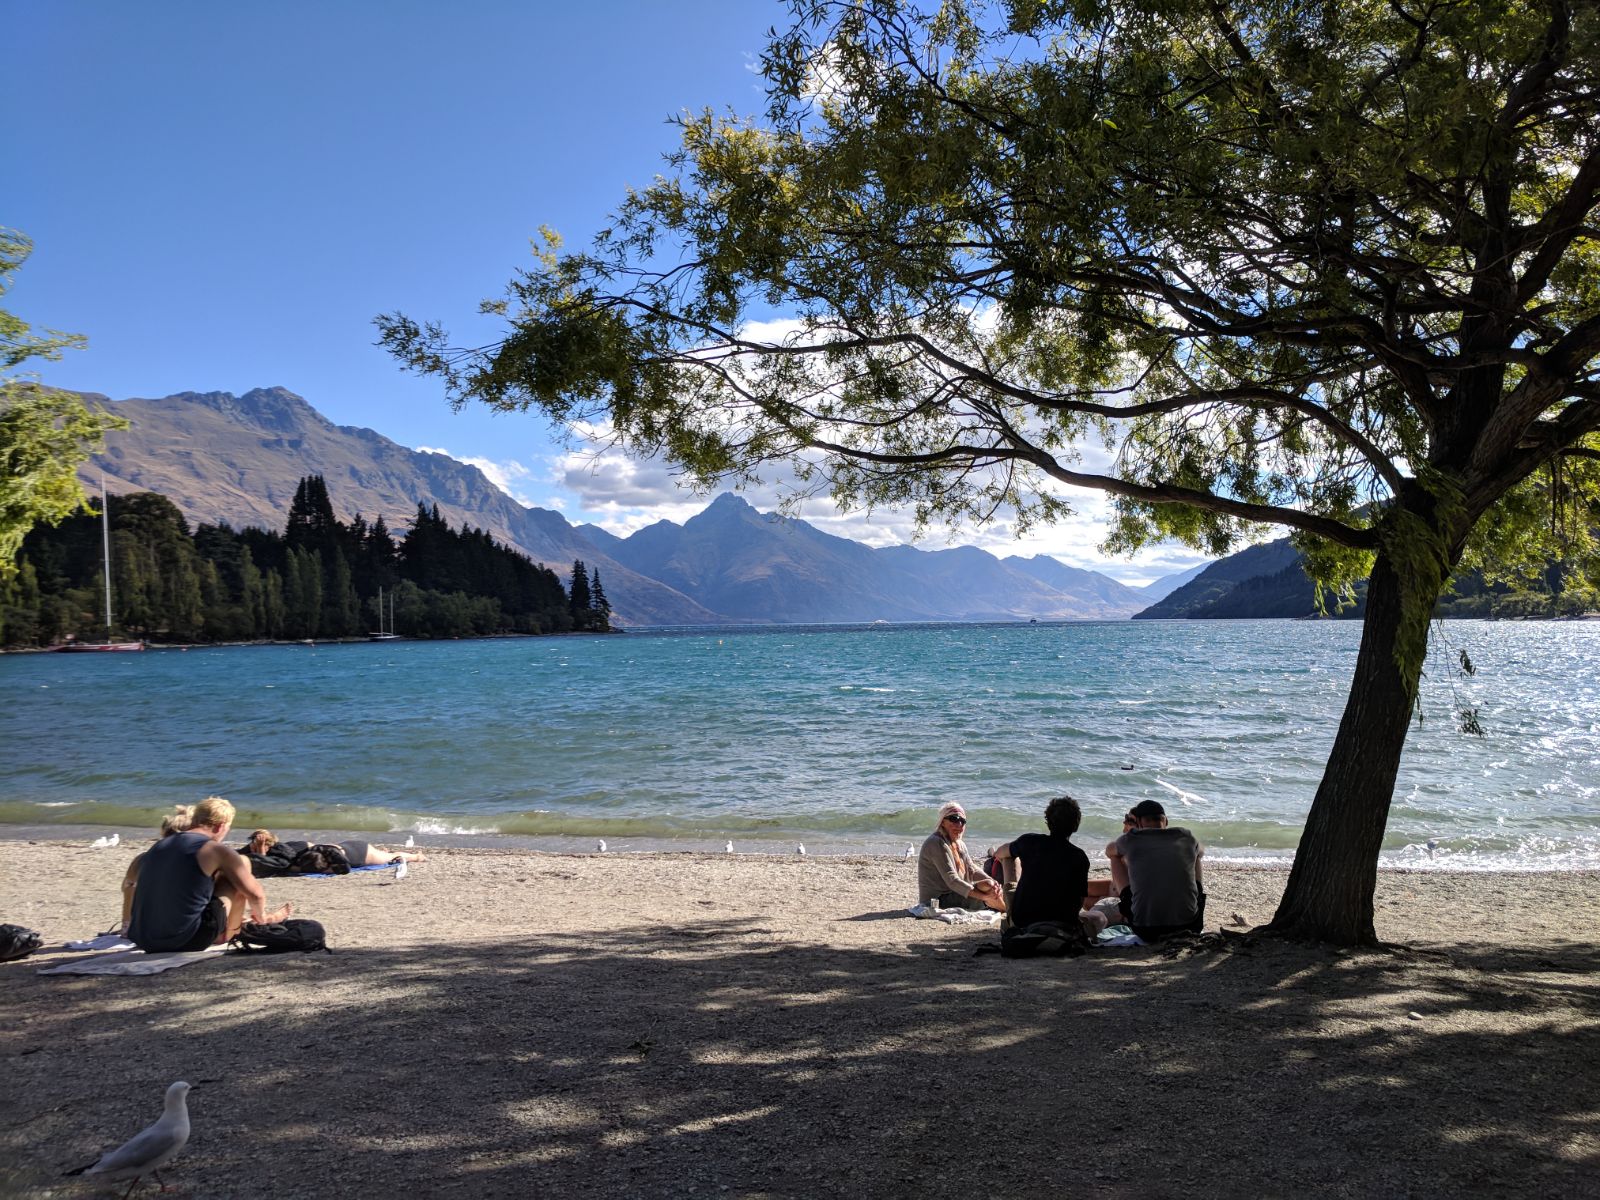 149--very hilly, but walked back down to the Queenstown Park with beach